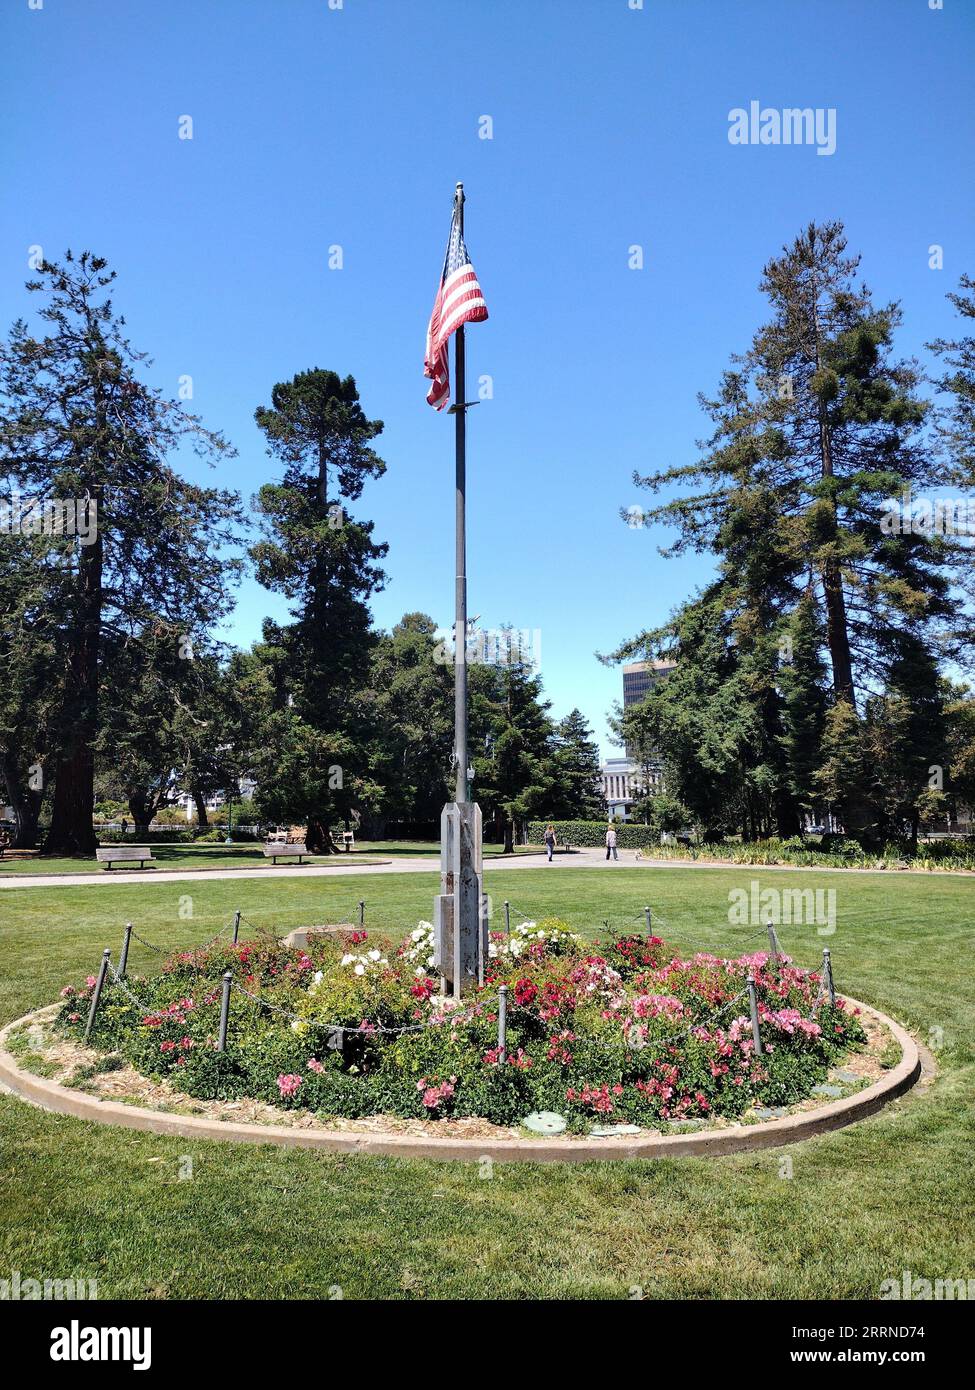 American flag in San Mateo central park Stock Photo